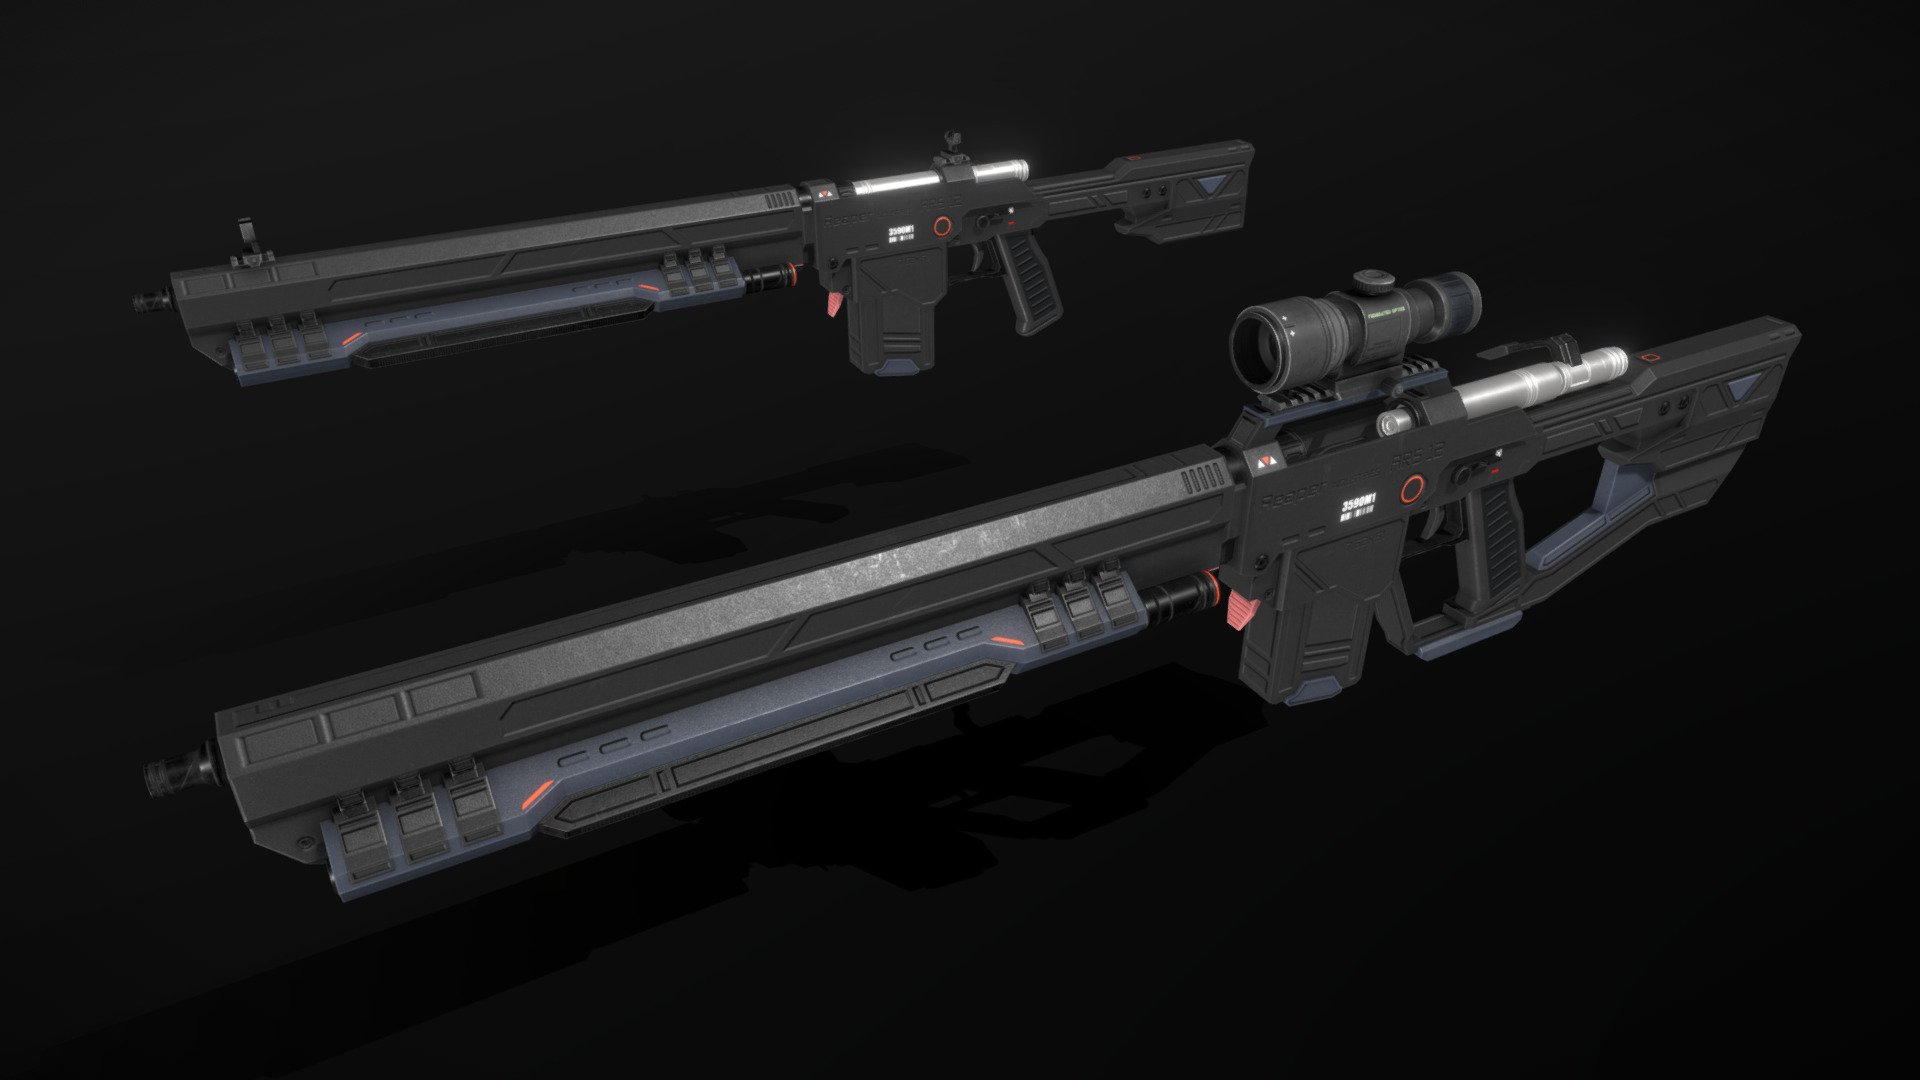 This is a model of a low-poly and game-ready scifi weapon. 

The weapon is composed of separate meshes that can be animated with a keyframe animation tool. 

The following modular equipment is included in this model pack: 6 types of ammunition, silencer, duckbill, 2 types of ironsights, 2 reflex sights, one scope, 3 picatinny rails, foregrip, 2 flashlights, 2 laser sights, 3 shotgun shell holders.

The model comes with several differently colored texture sets. The PSD file with intact layers is included.

Please note: The textures in the Sketchfab viewer have a reduced resolution to improve Sketchfab loading speed.

If you have bought this model please make sure to download the “additional file”.  It contains FBX and OBJ meshes, full resolution textures and the source PSDs with intact layers. The meshes are separate and can be animated (e.g. firing animations) 3d model